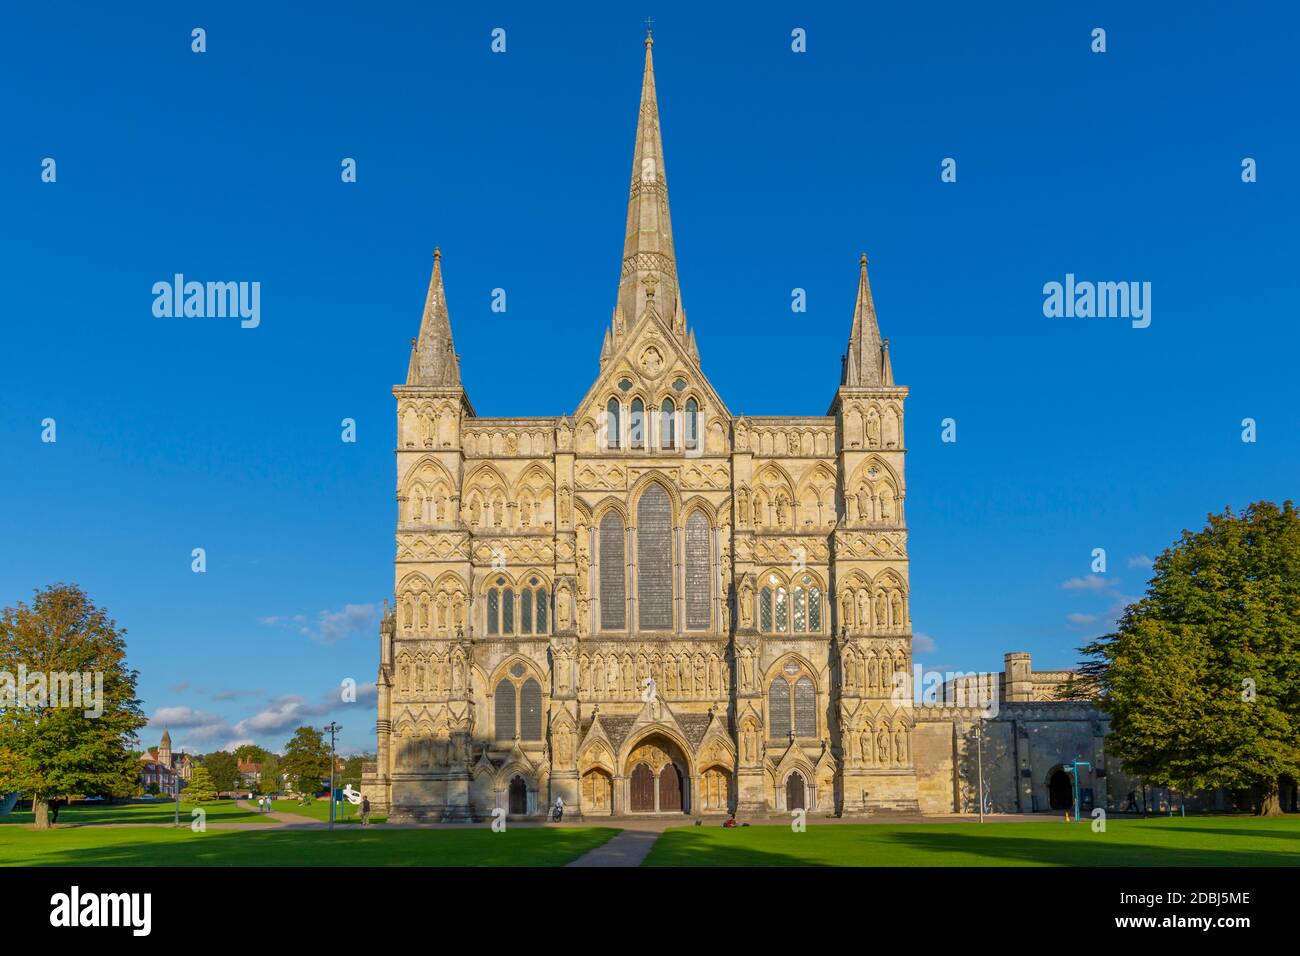 View of Salisbury Cathedral against clear blue sky, Salisbury, Wiltshire, England, United Kingdom, Europe Stock Photo